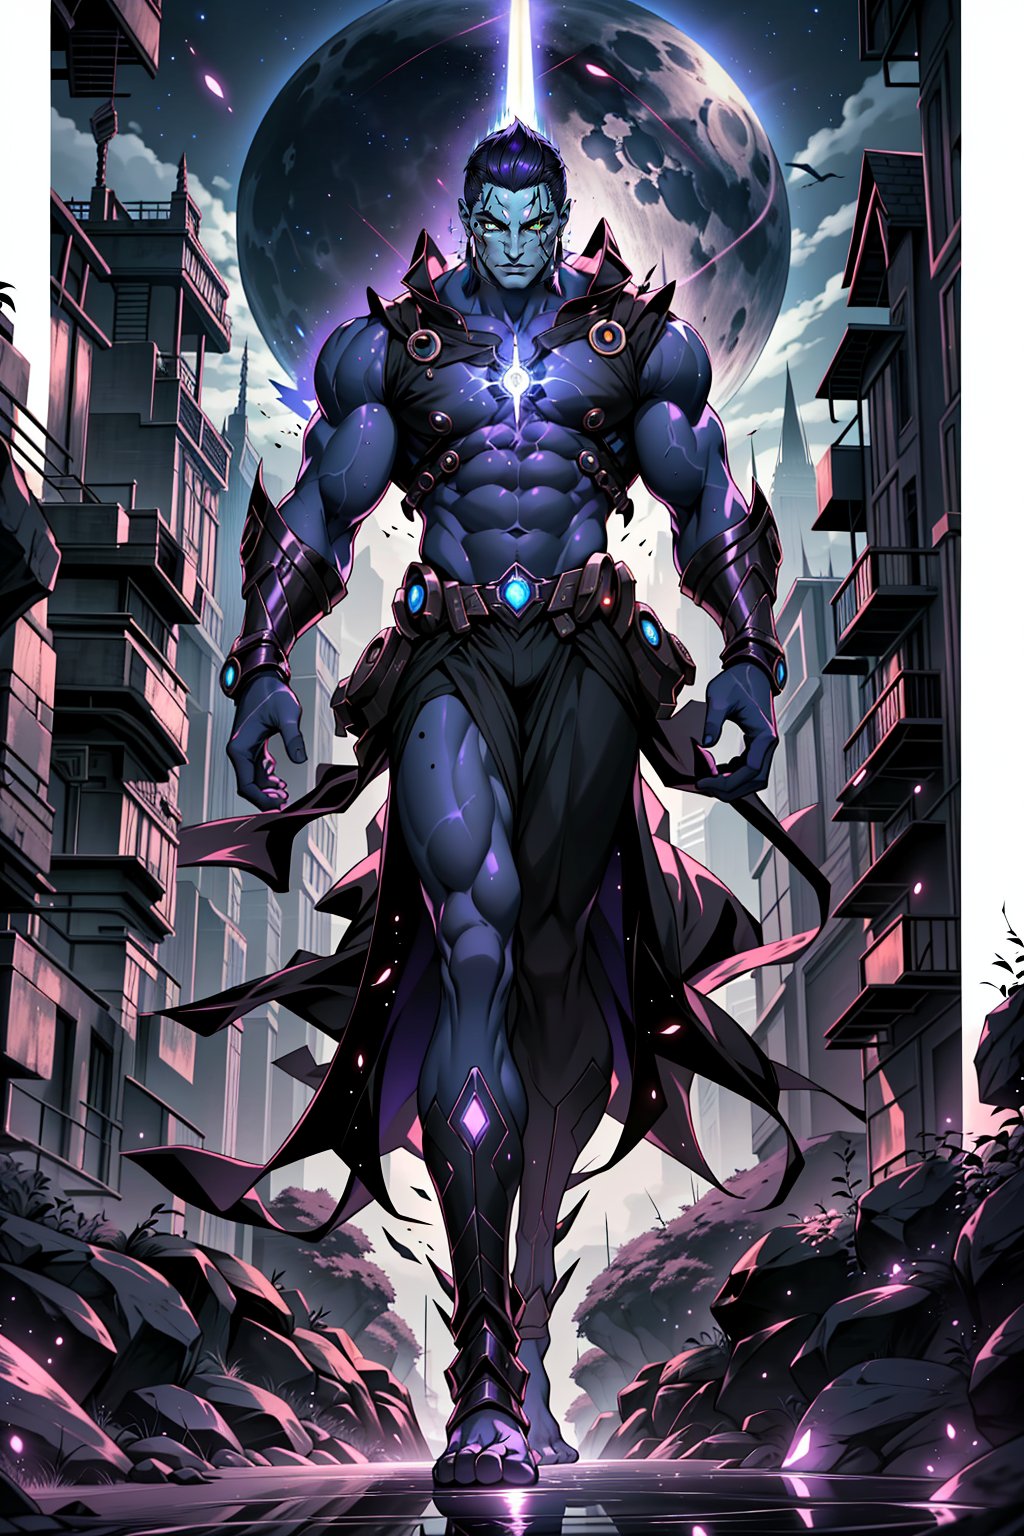 full-body shot of an extraterrestrial warrior floating above a sprawling alien landscape. The subject's gray skin and bald head glistens under the eerie violet glow emanating from his eyes. His muscular physique is accentuated by the tight custom attire, with dark maroon, purple and blue-chrome hues that seem to shimmer in harmony with the atmospheric energy. In his left hand, he holds an orb of power, its luminescence casting an otherworldly glow on the surrounding terrain. The chest shield's metallic sheen catches the light, as if infused with the same energy as the warrior's eyes. No shoes adorn his feet, allowing him to hover effortlessly above the massive, ancient alien structure that rises from the ground like a monolith.